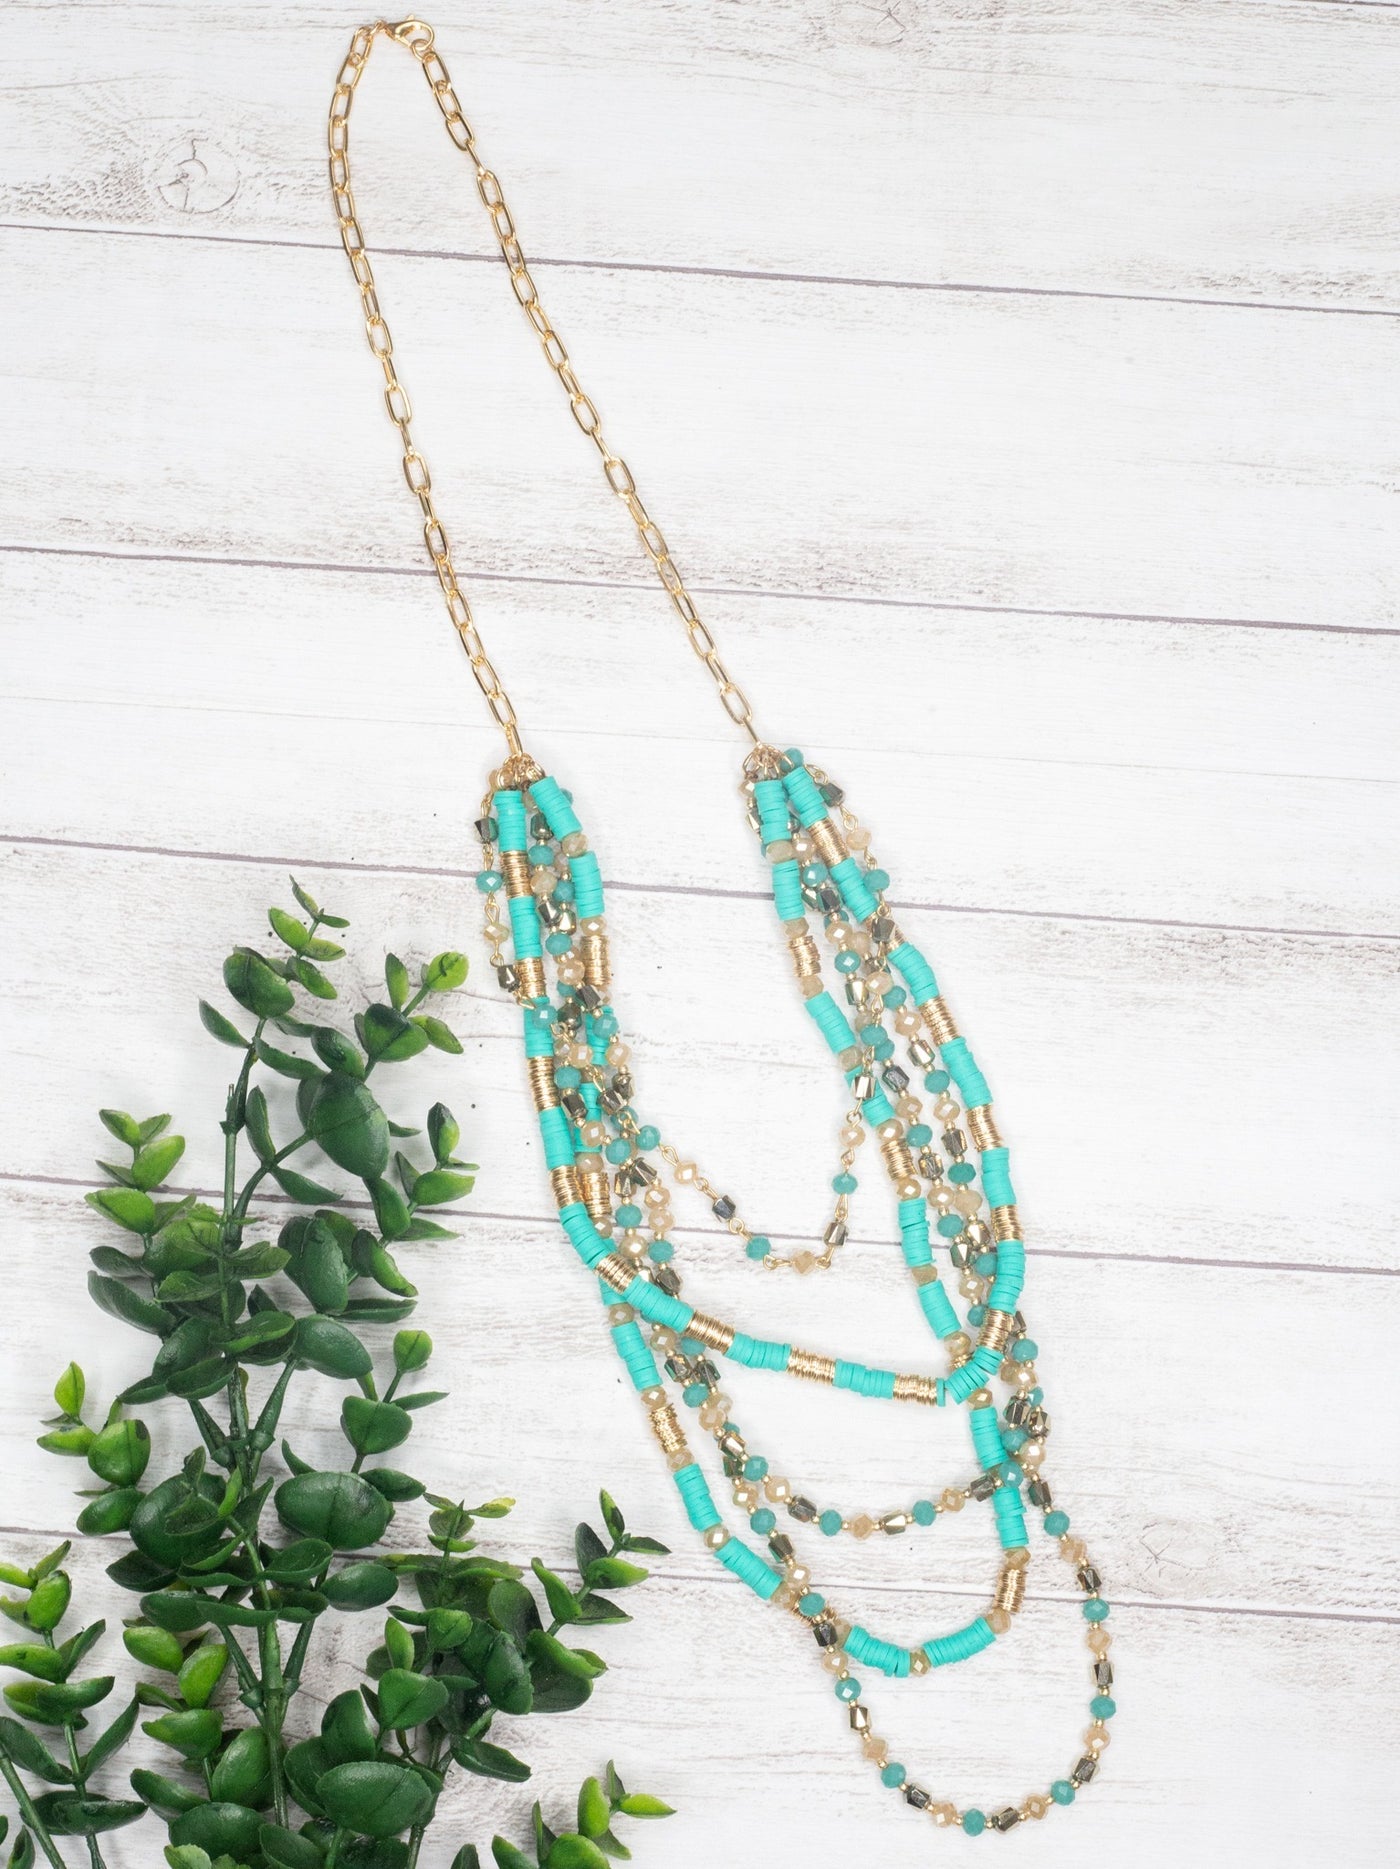 Im on Vacay Mode Turquoise Shell Beads With Mixed Crystal Beads Gold Link Chain Necklace